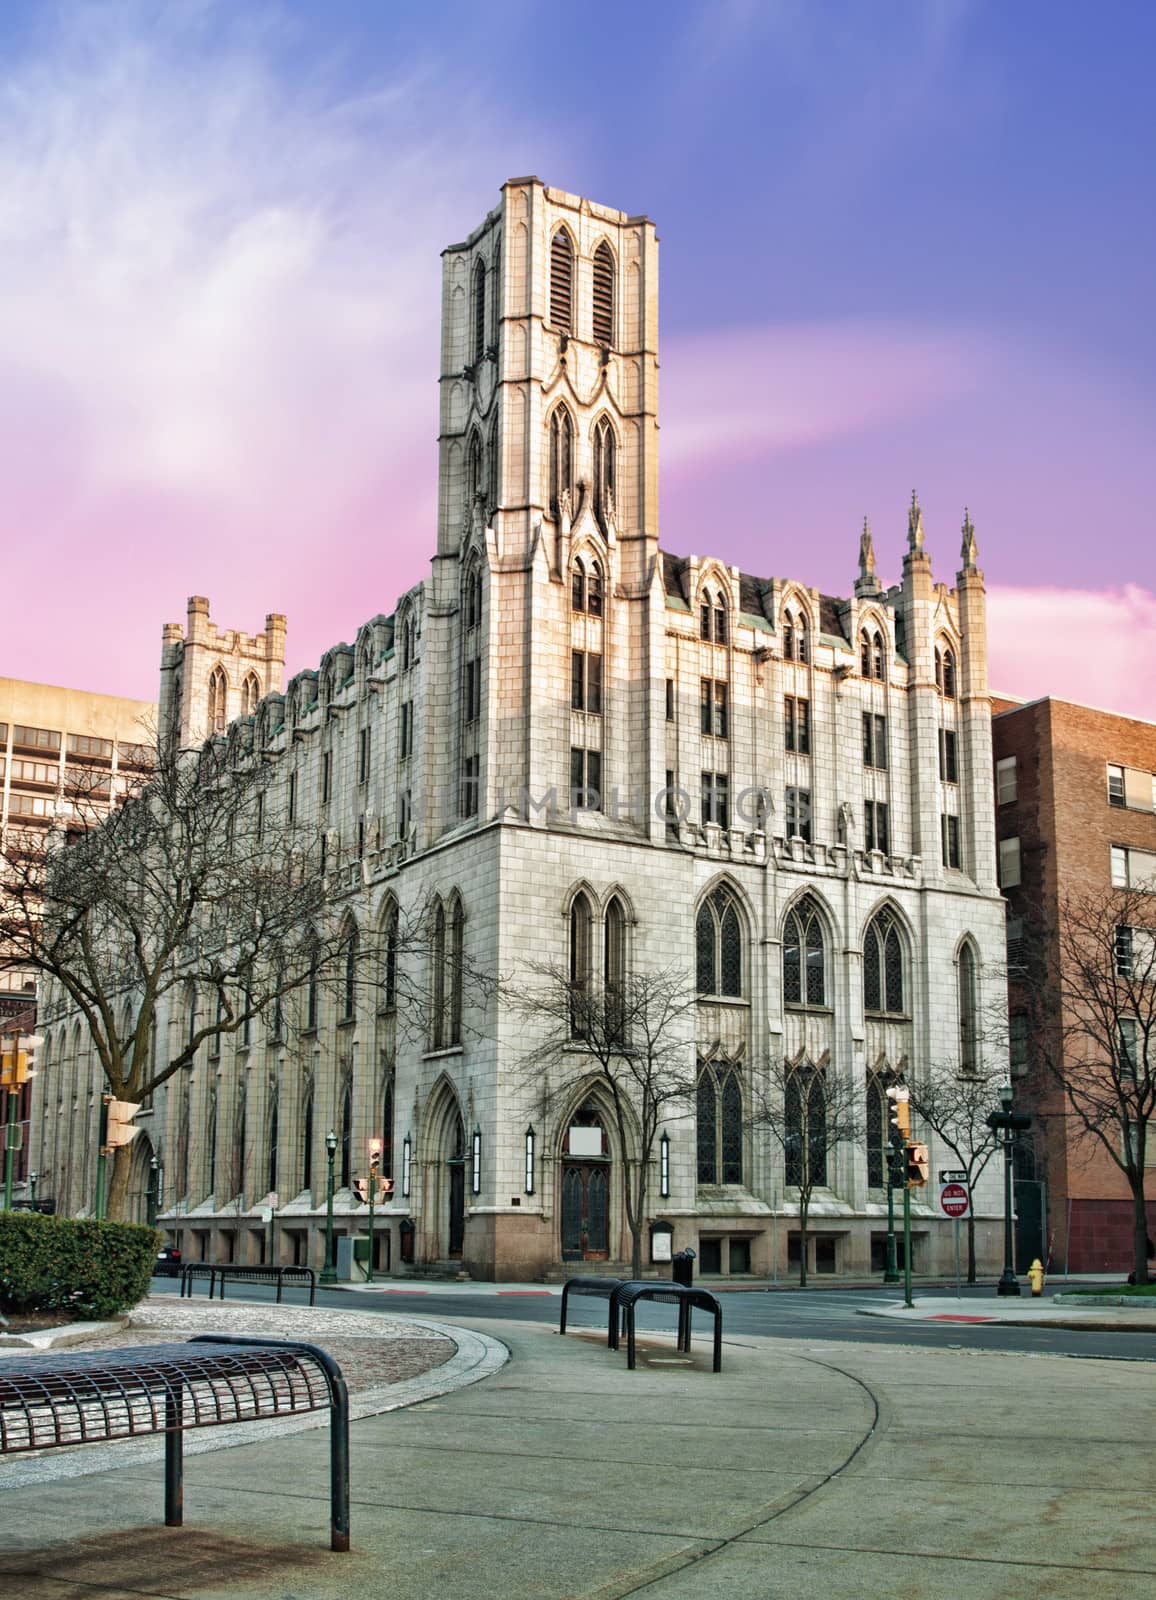 the historic and beautiful mizpah tower, located in syracuse,new york